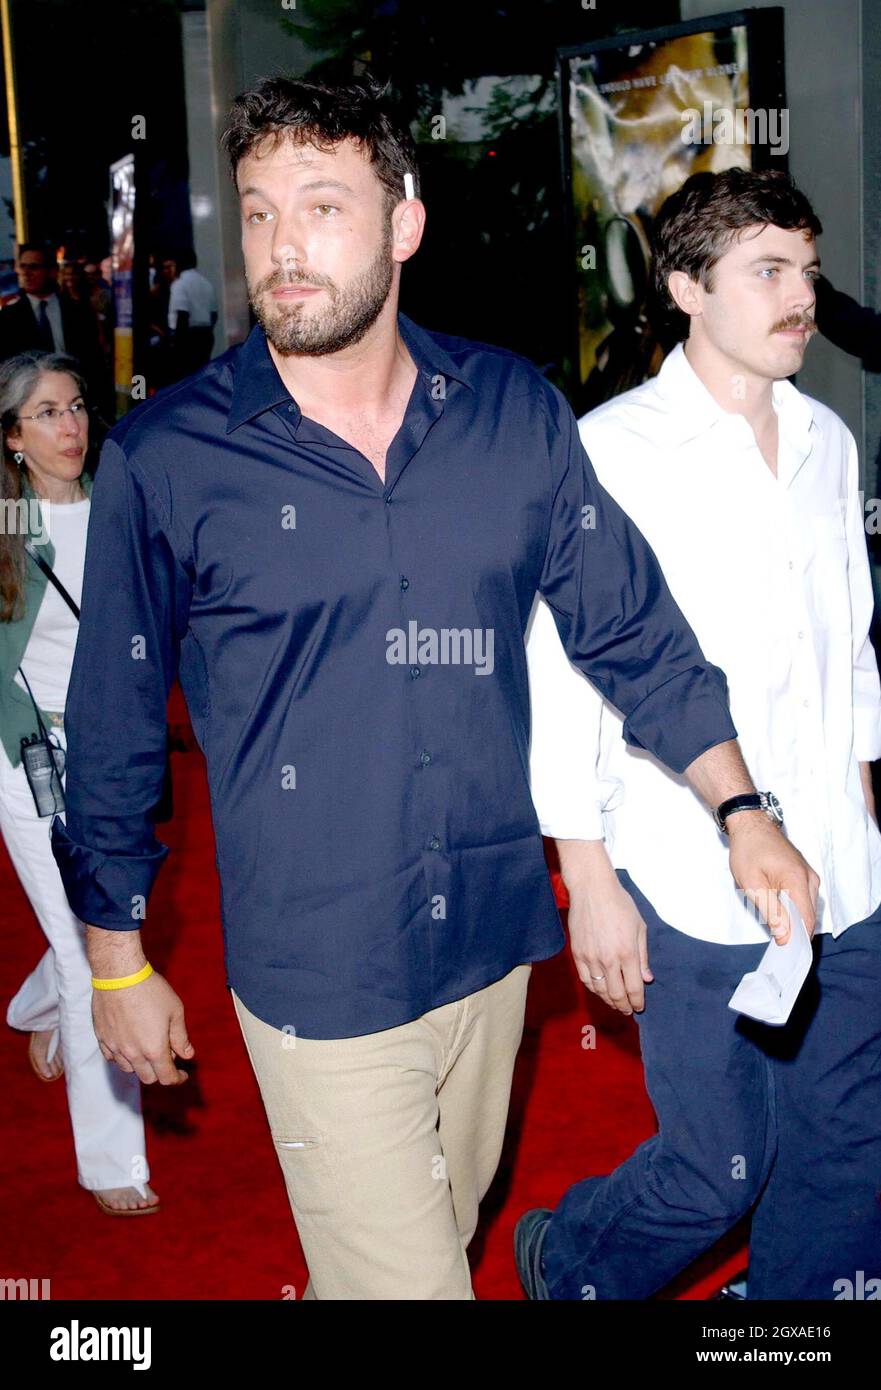 Ben Affleck and his brother Casey Affleck attending  the premiere of 'The Bourne Supremacy' held at the Arclight theatre, Hollywood.  Stock Photo